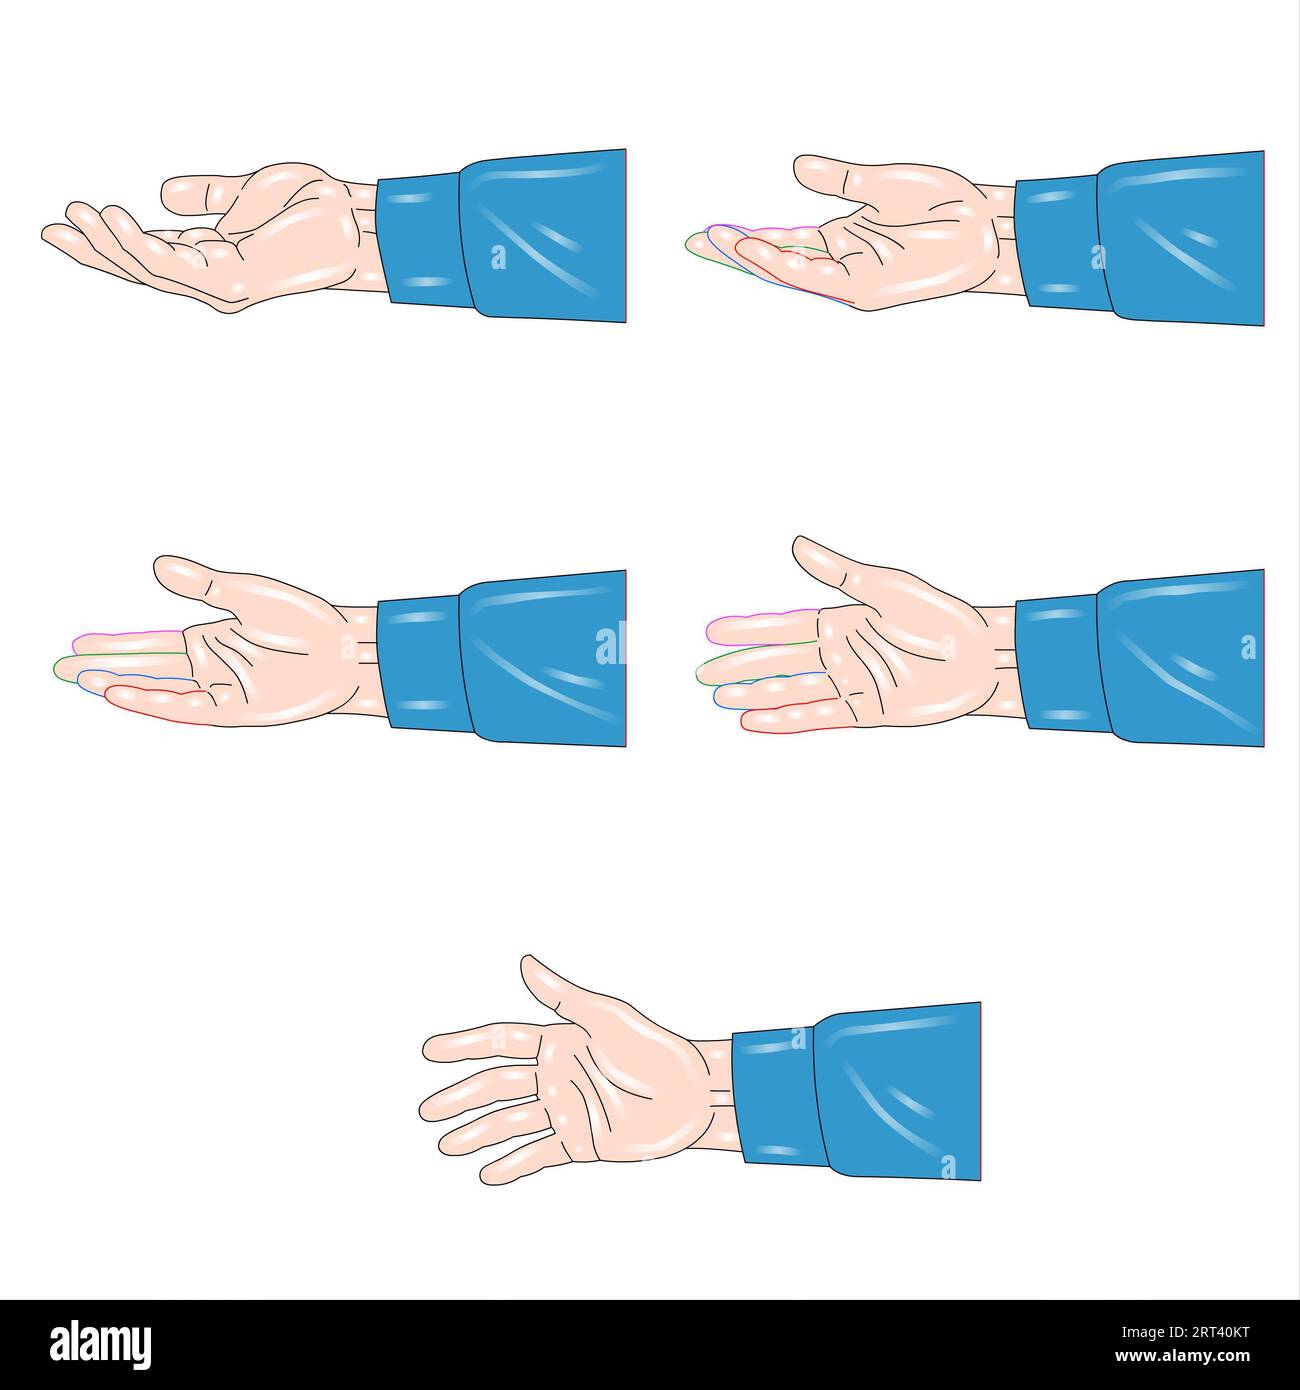 Illustration of a set of hands showing different gestures on a white background Stock Photo